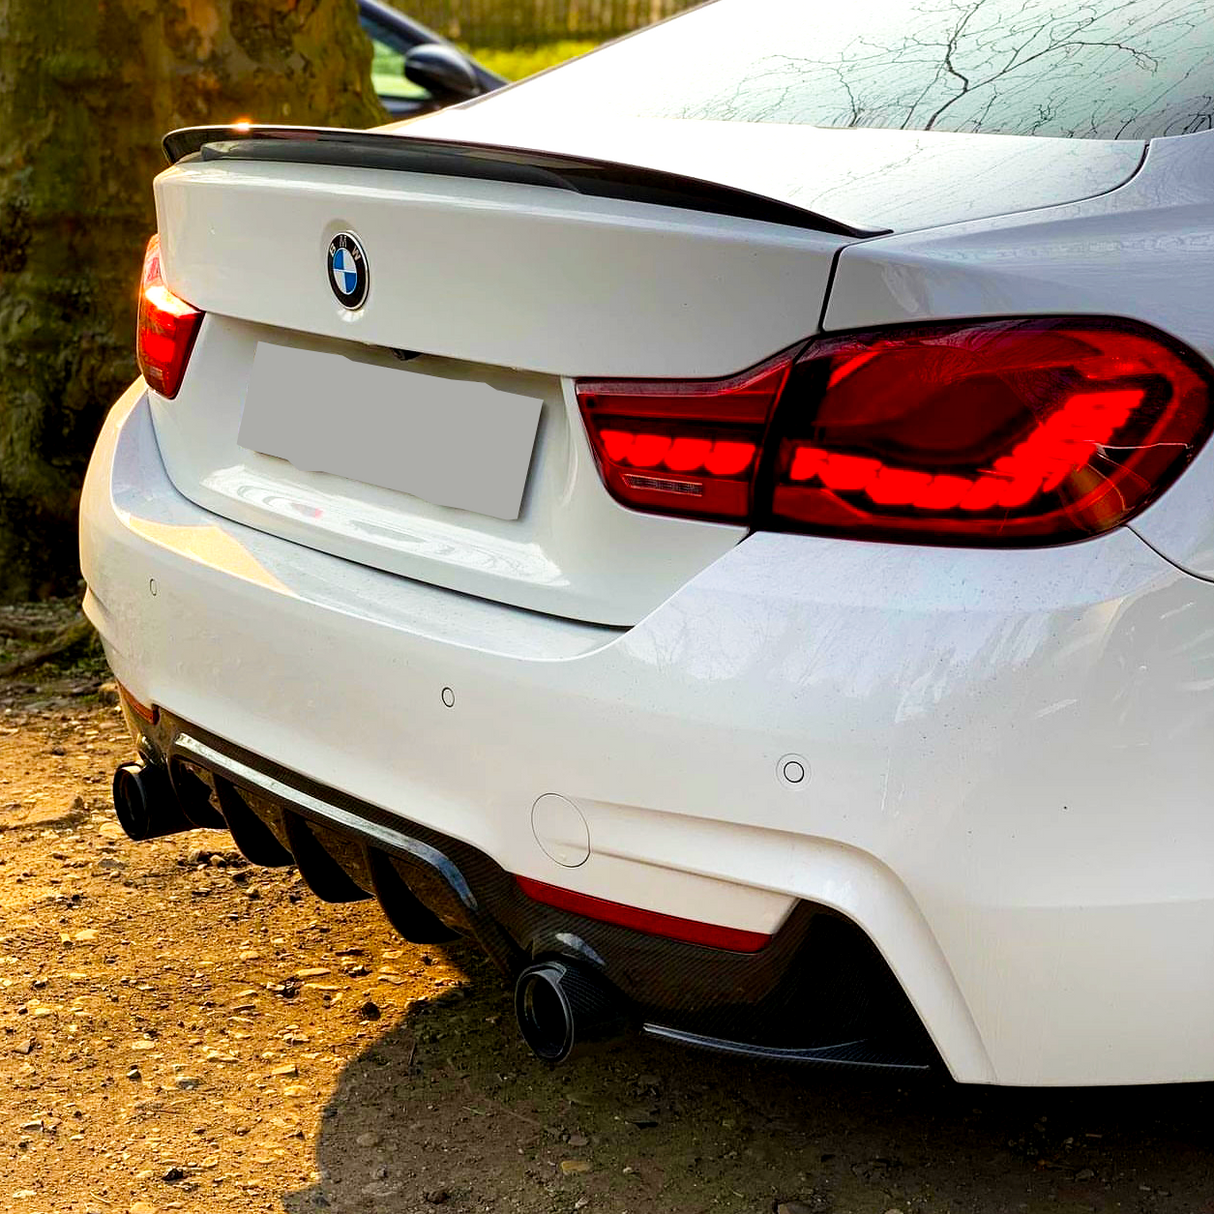 BMW 4 Series F32 Coupe Spoiler: Gloss Black Performance Style – Carbon  Accents